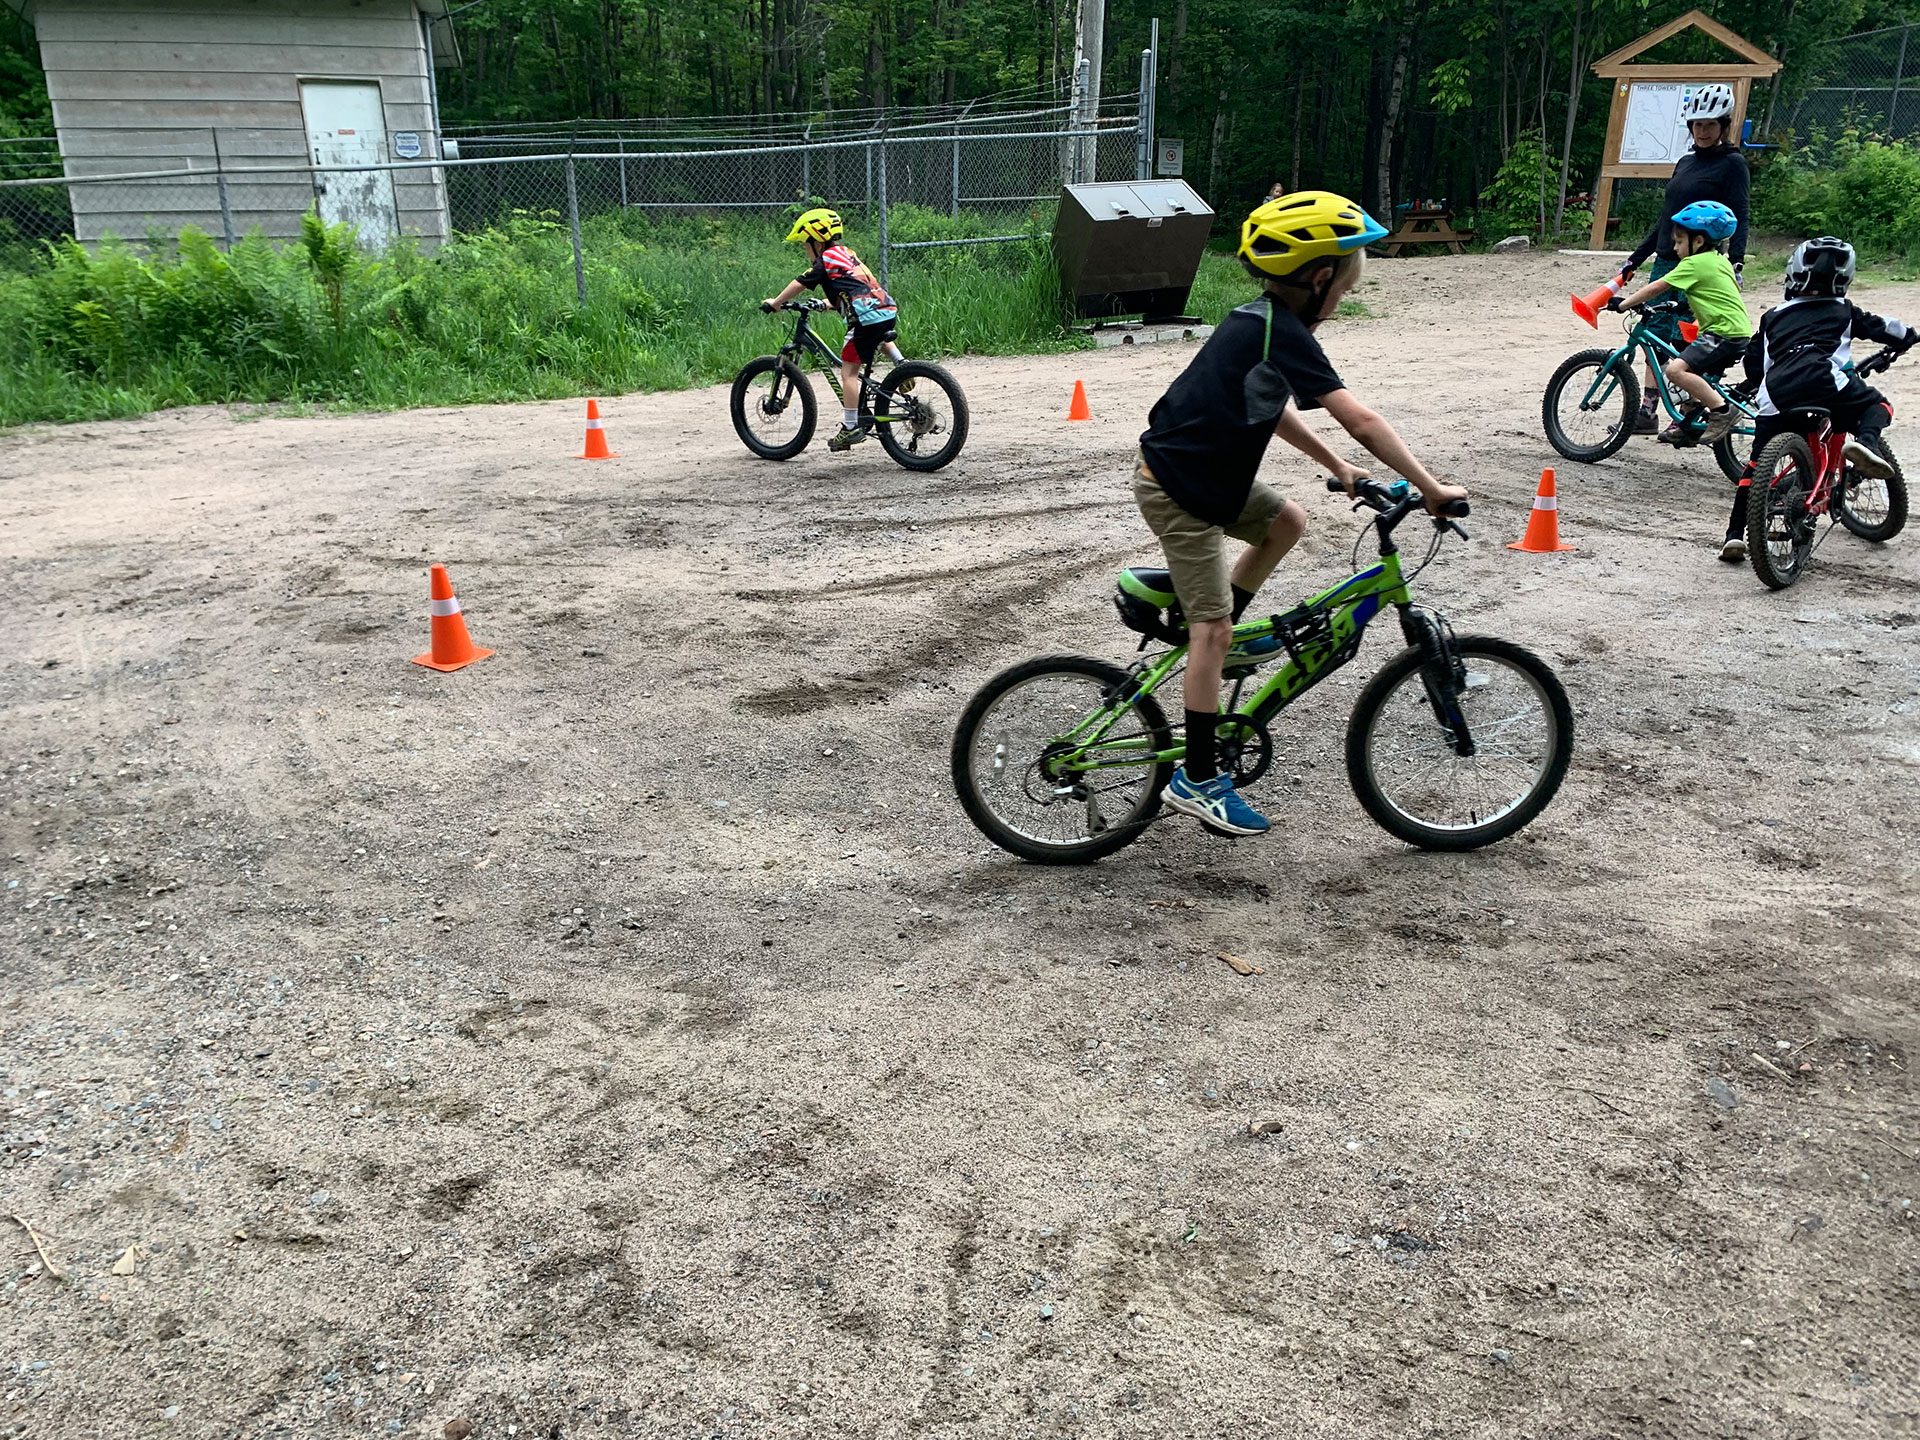 kids ride their bicycles through pylons as part of a cycling class